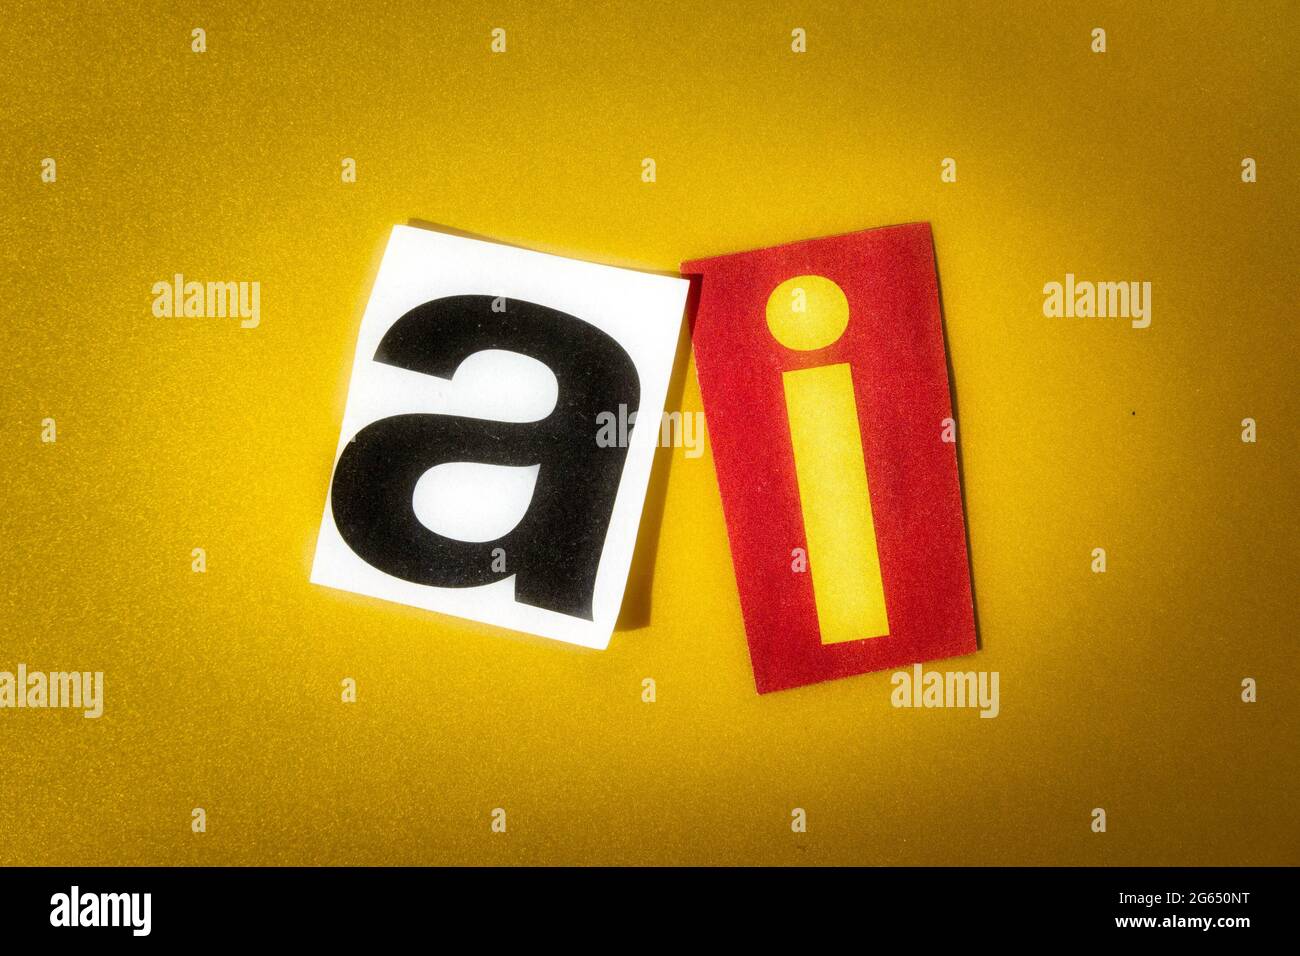 Shorthand High Resolution Stock Photography and Images - Alamy